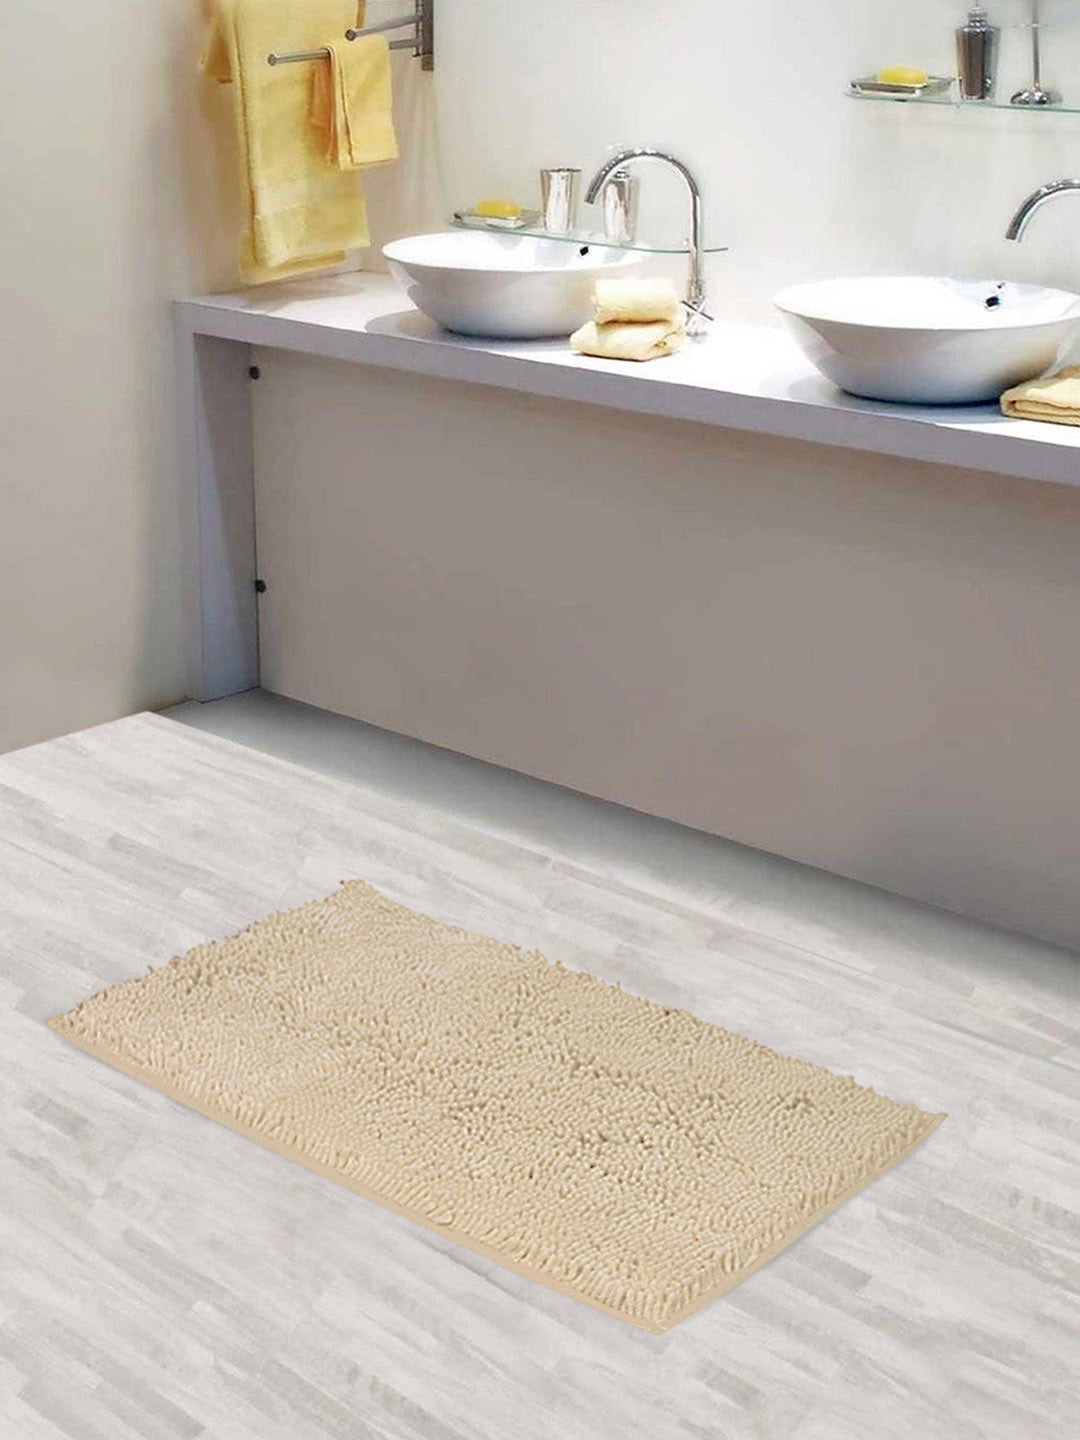 Lushomes Bathroom Mat, 2200 GSM Floor, bath mat Mat with High Pile Microfiber, anti skid mat for bathroom Floor, bath mat Non Slip Anti Slip, Premium Quality (20 x 30 inches, Single Pc, Ivory)